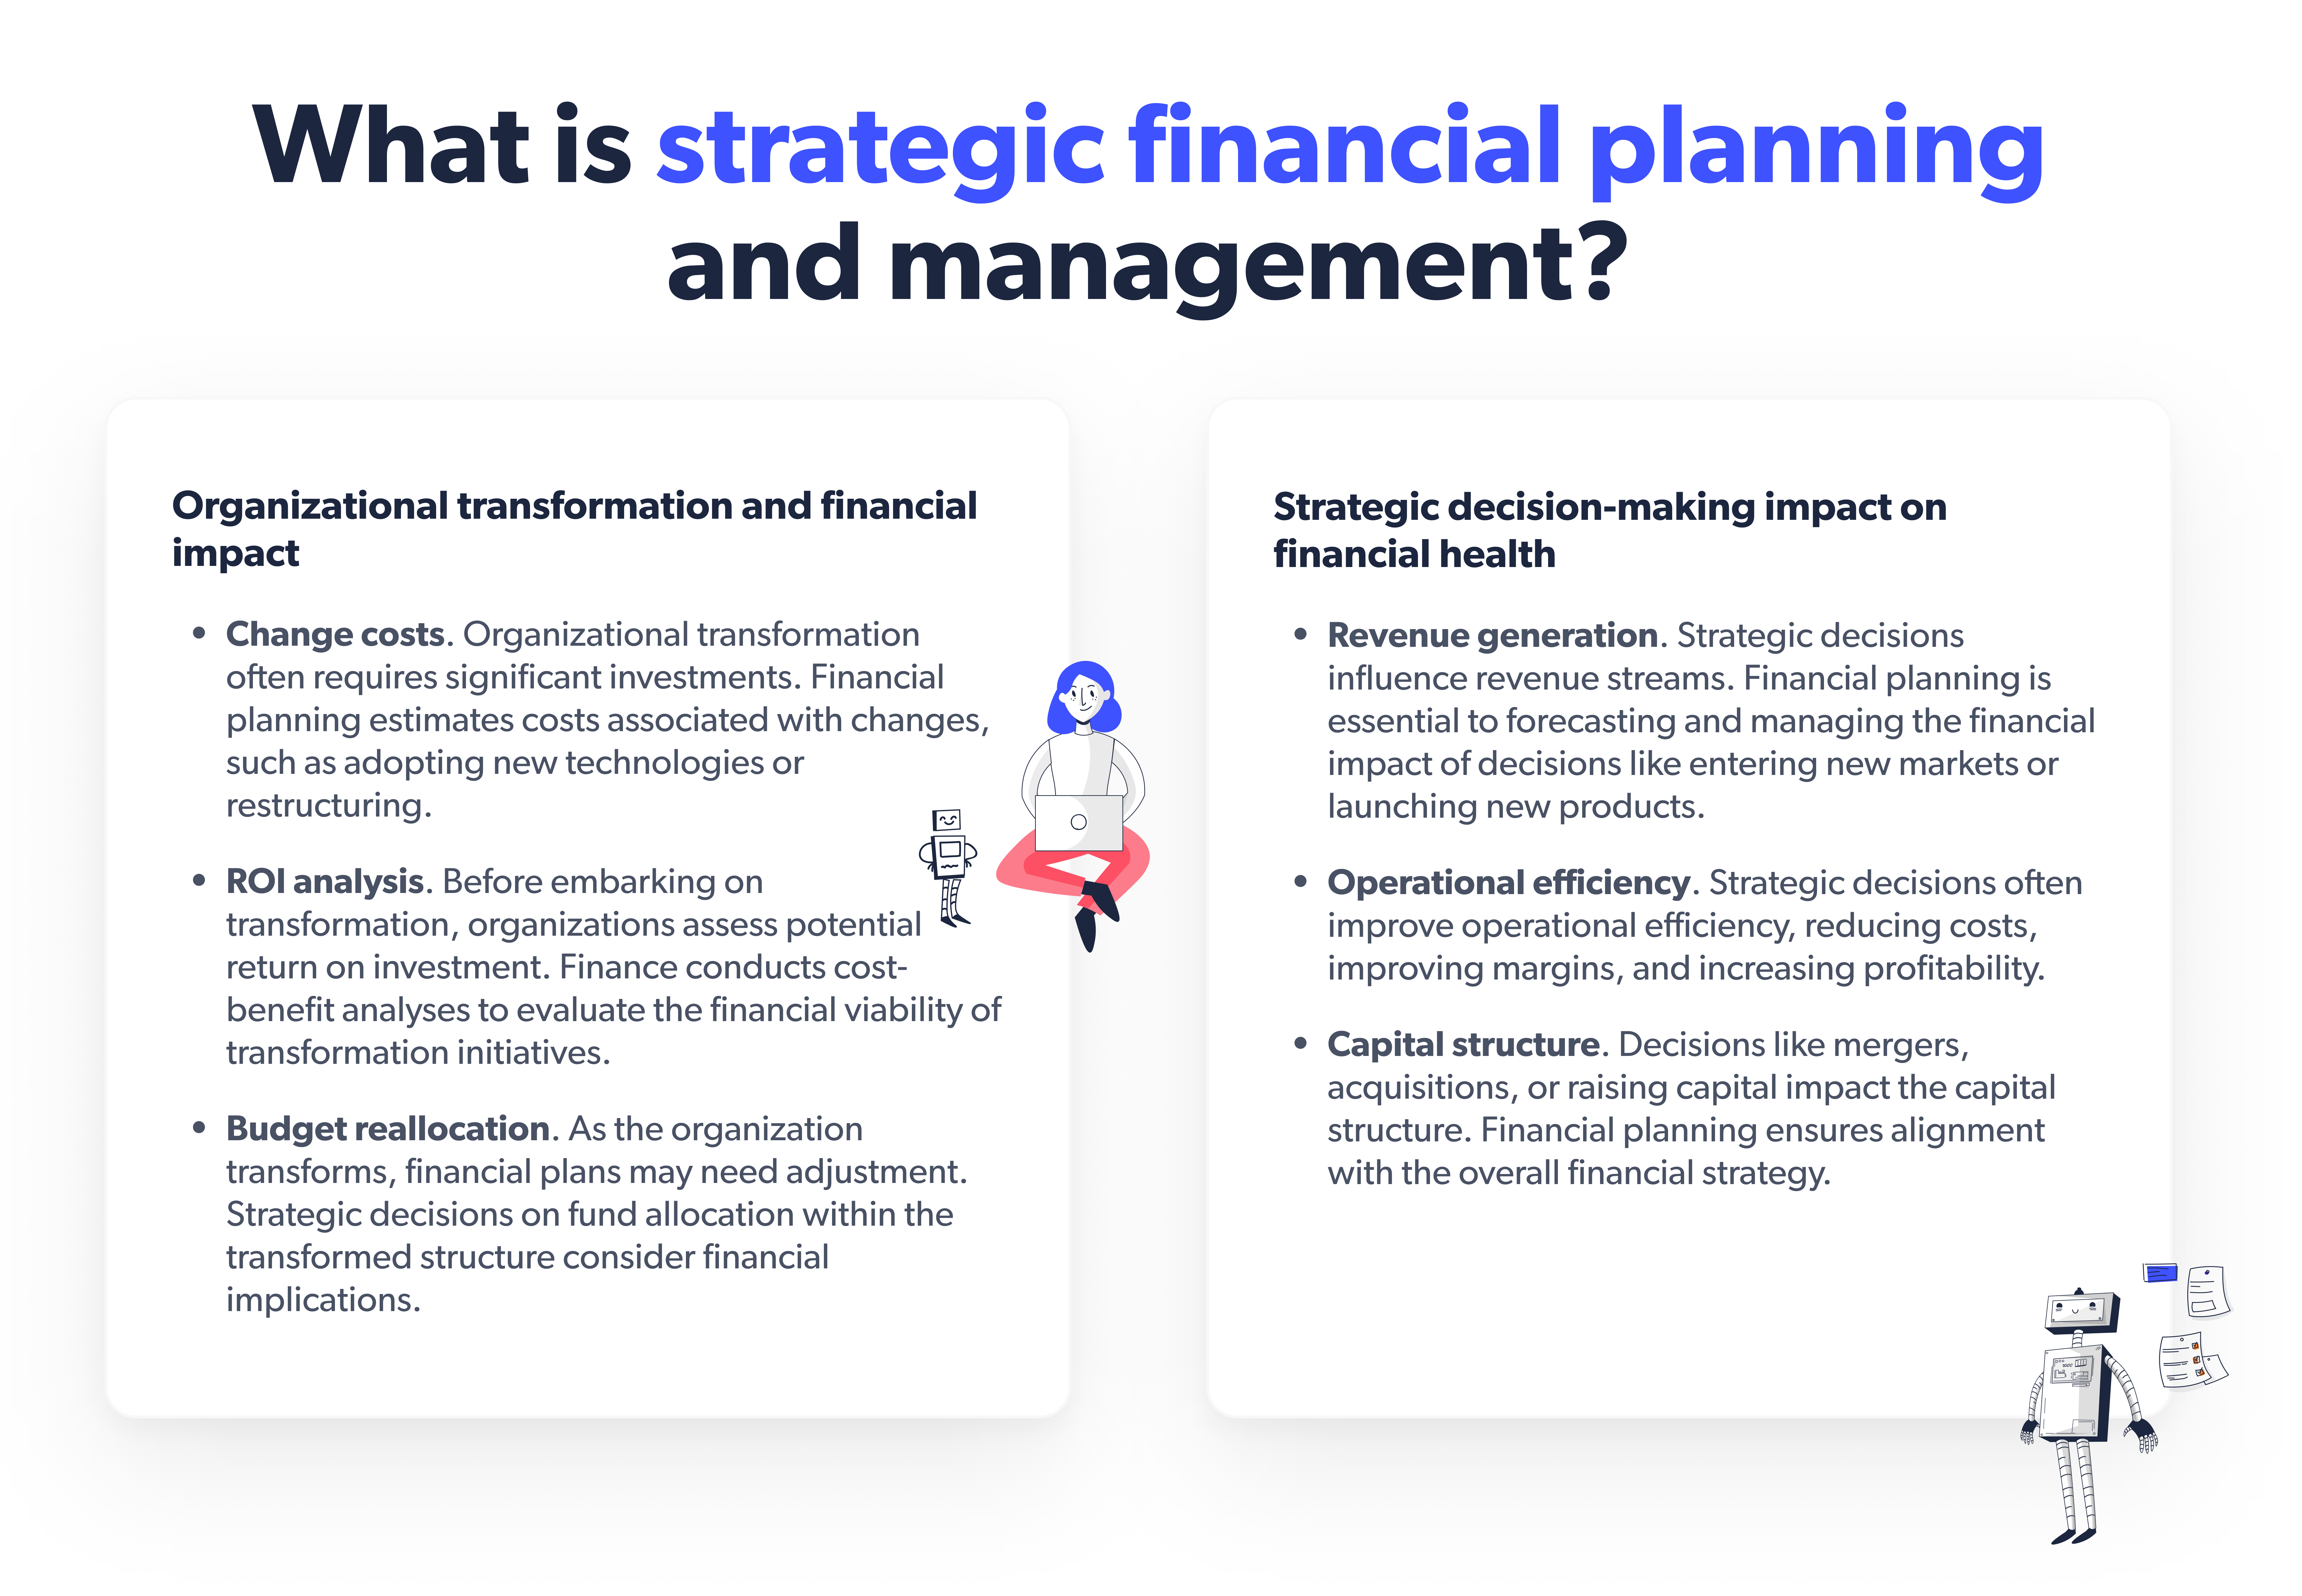 What is strategic financial planning and management